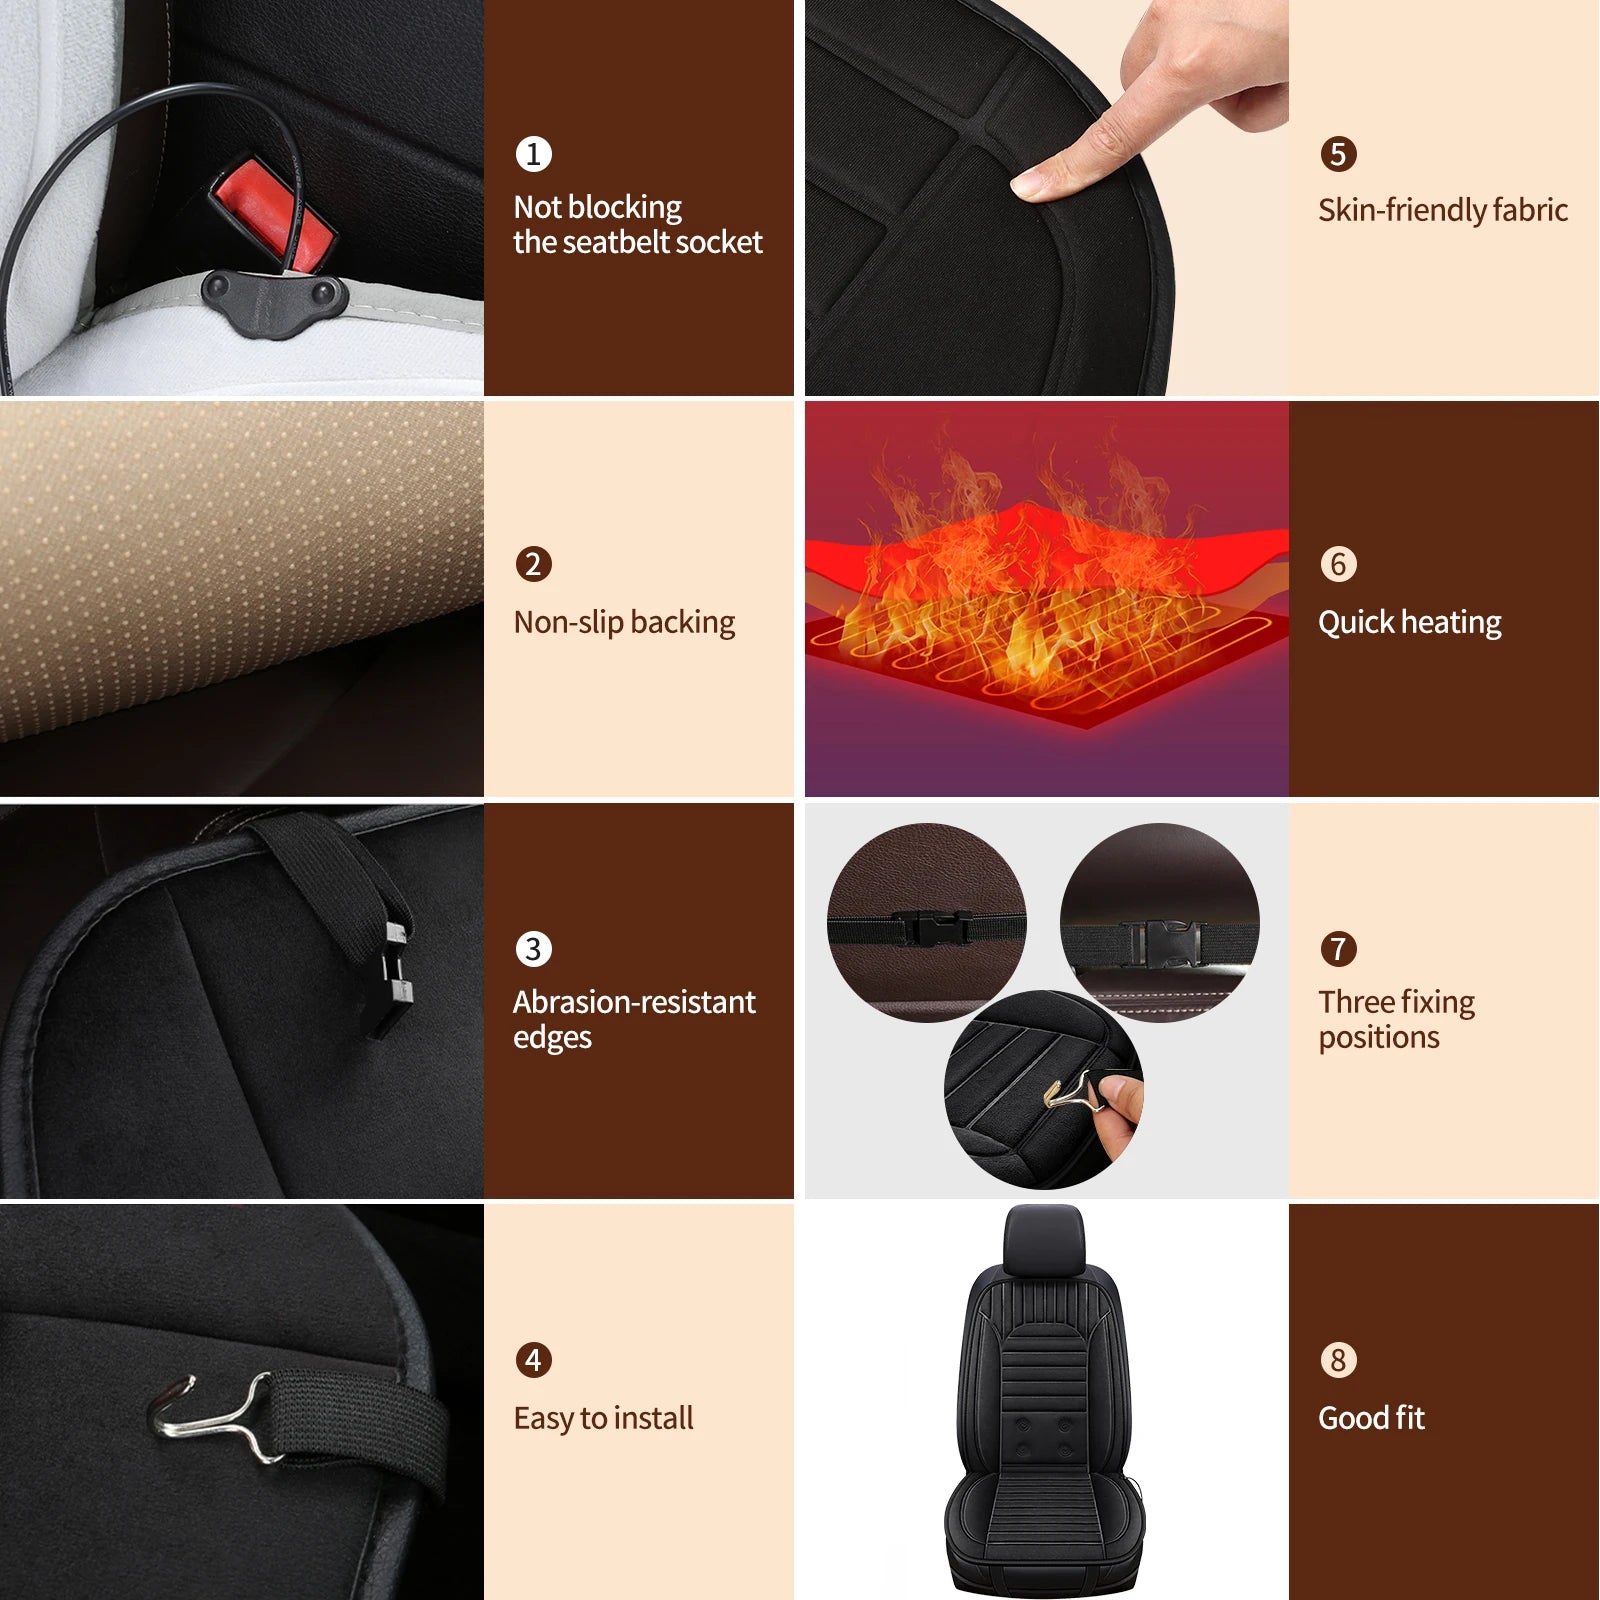 Car Heating Cushion, Heated Seat Cushion Set, Perfect Car Heated Seat Covers, Cigarette Lighter Plugged in Suitable for Winter S